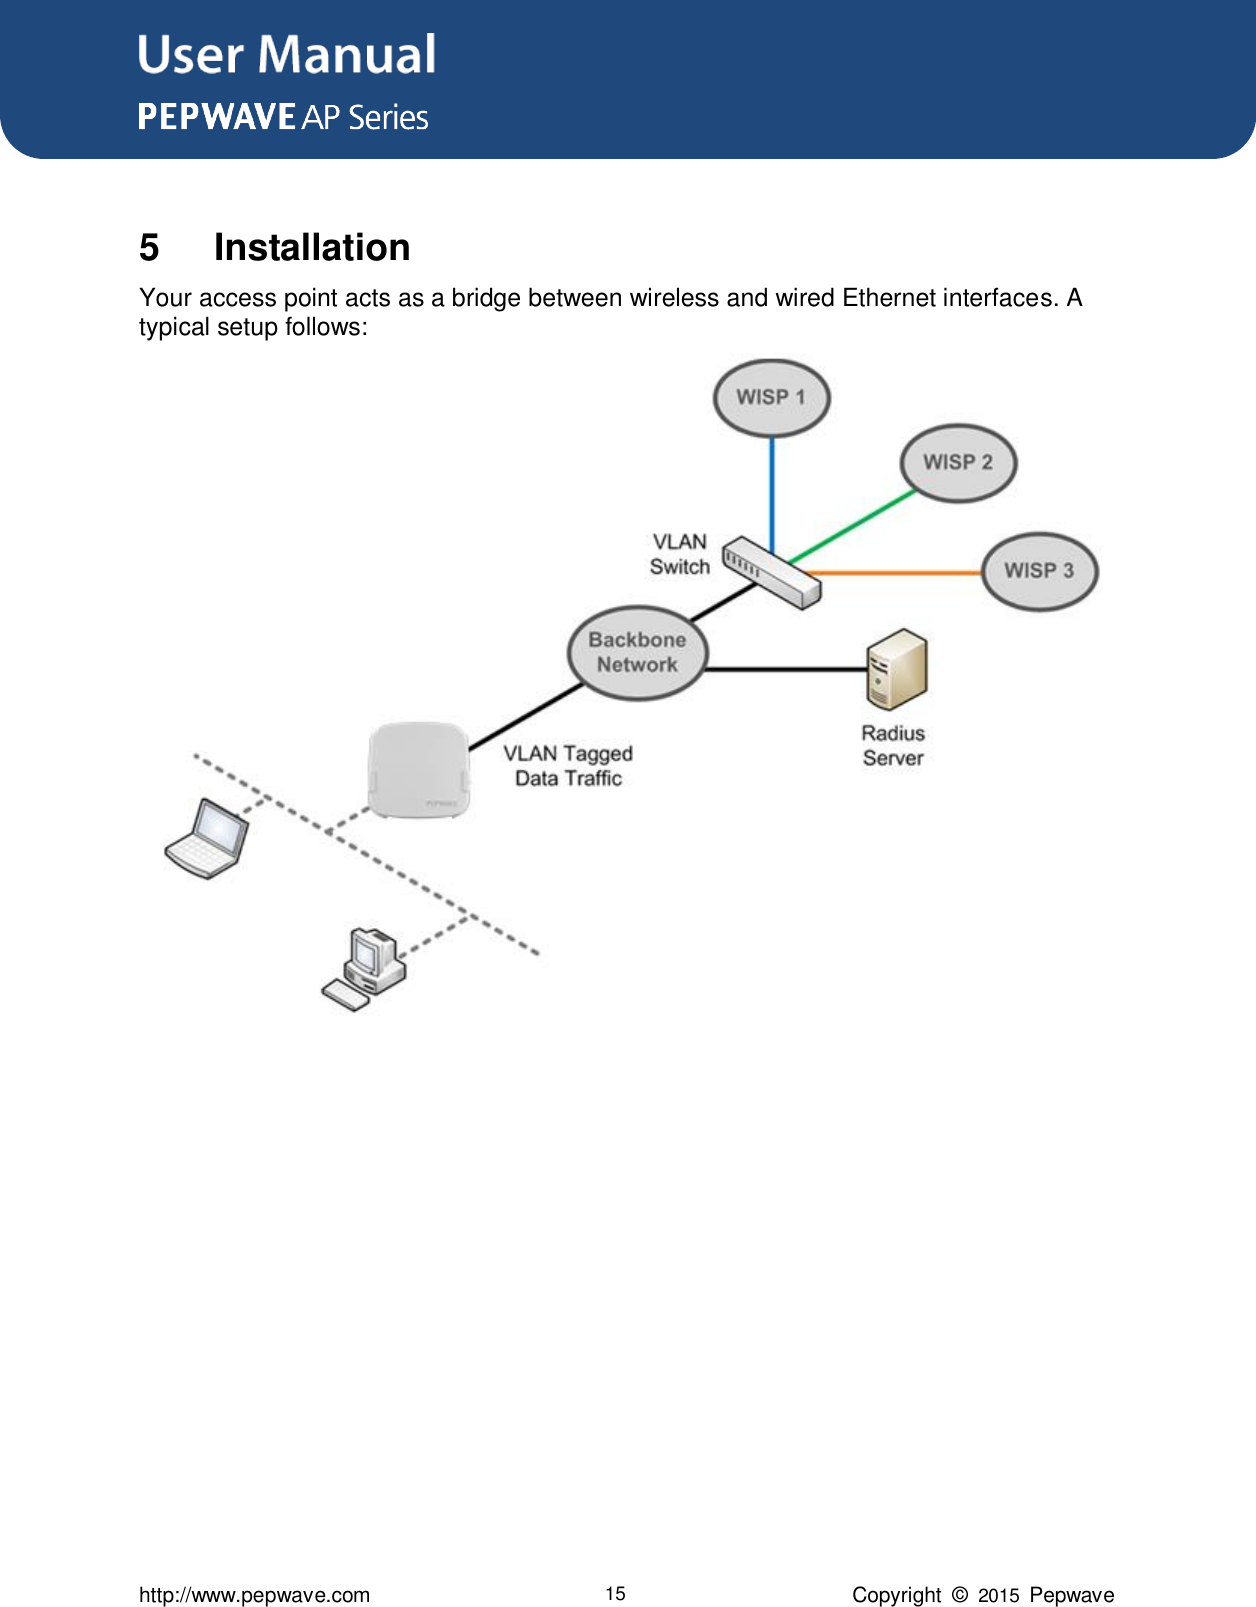 User Manual      http://www.pepwave.com 15 Copyright  ©  2015  Pepwave  5  Installation Your access point acts as a bridge between wireless and wired Ethernet interfaces. A typical setup follows:             